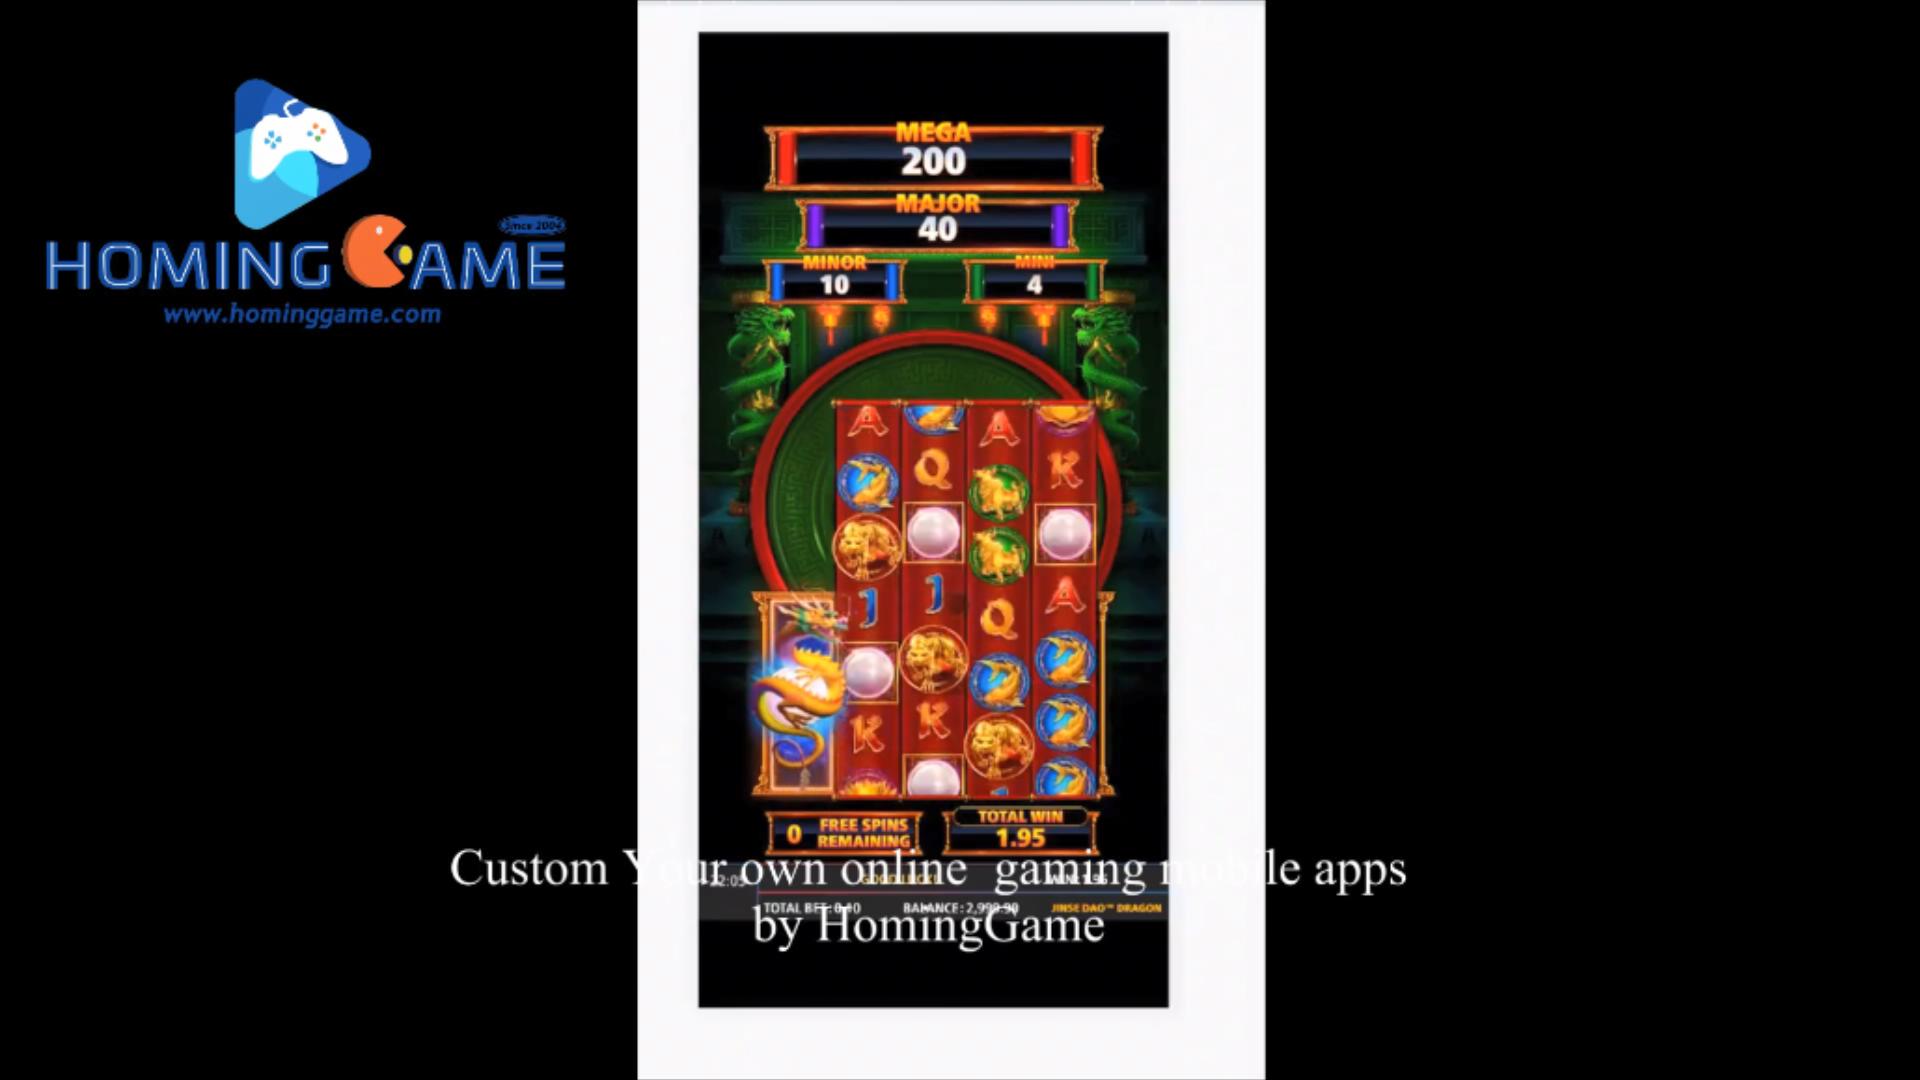 Special Engineer Team Custom You Own Online gaming mobile Apps System like Jinse Dao Dragon Online Slot gaming and ocean king 3 plus fire phoenix online fishing game(Call whatsapp:+8618688409495),online fishing game app,fishing game app,online slot game apps,download fishing game app,dowanload online fishing game apps,online gaming system,fishing game,fishing table,fishing table game machine,fishing game machine,fishing arcade game machine,fish hunter fishing game machine,upright table fishing game machine,standup fishing game machine,ocean king 3 fishing game machine,capatian america fishing game machine,tiger stirke fishing game machine,godzilla fishing game machine,rampage fishing game machine,dragon legend fishing game machine,ocean king,igs fishing game machine,electrical fishing game machine,usa fishing game machine,ocean king 2 fishing gam emachine,fishing game machine supplier,fishing game machine manufacturer,gaming machine,gambling machine,game machine,arcade game machine,coin operated game machine,indoor game machine,electrical game machine,amusement park game equipment,amusement machine,gaming,casino gaming machine,usa fishing game machine supplier,USA fishing table game machine manufacturer,fishing game cheats,fishing game skills,how to paly the fishing game machine,fishing game decoding,fishing game decoder box,hominggame,www.gametube.hk,hominggame fishing game,entertainment game machine,family entertainment game machine,arcade game machine for sale